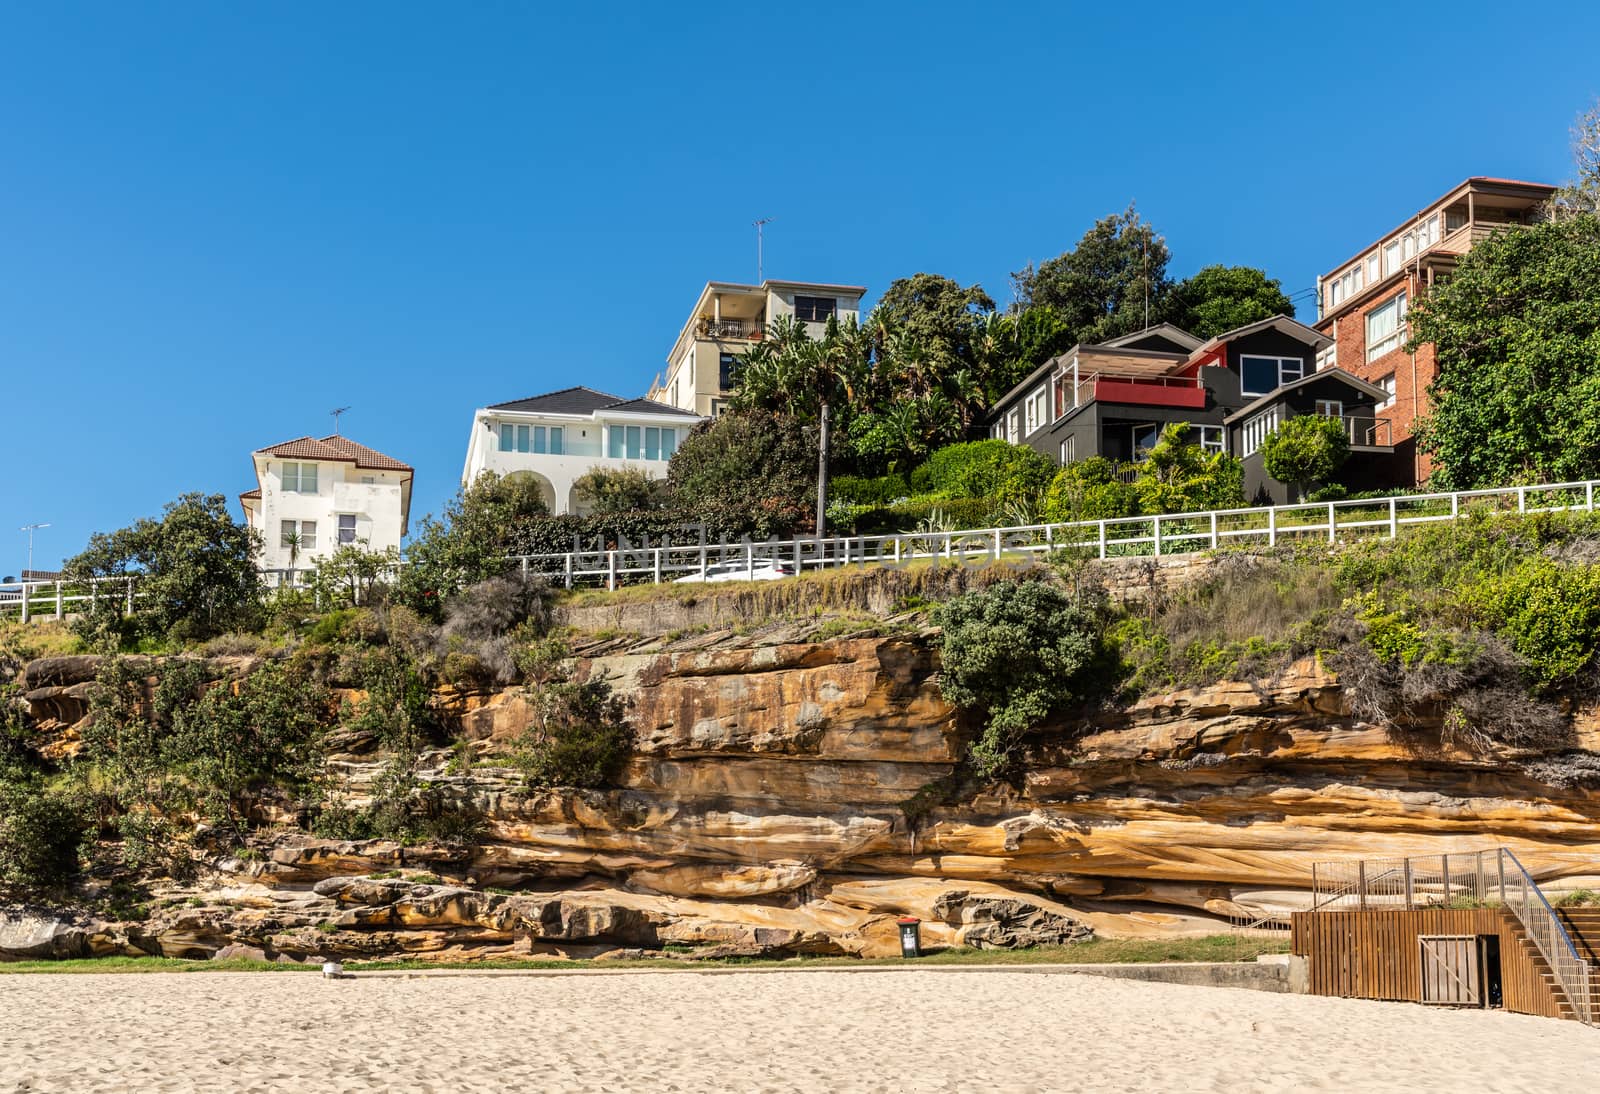 Sydney, Australia - February 11, 2019: The green overgrown cliffs, south side, with houses on top and sand in front of Tamarama beach under blue sky.